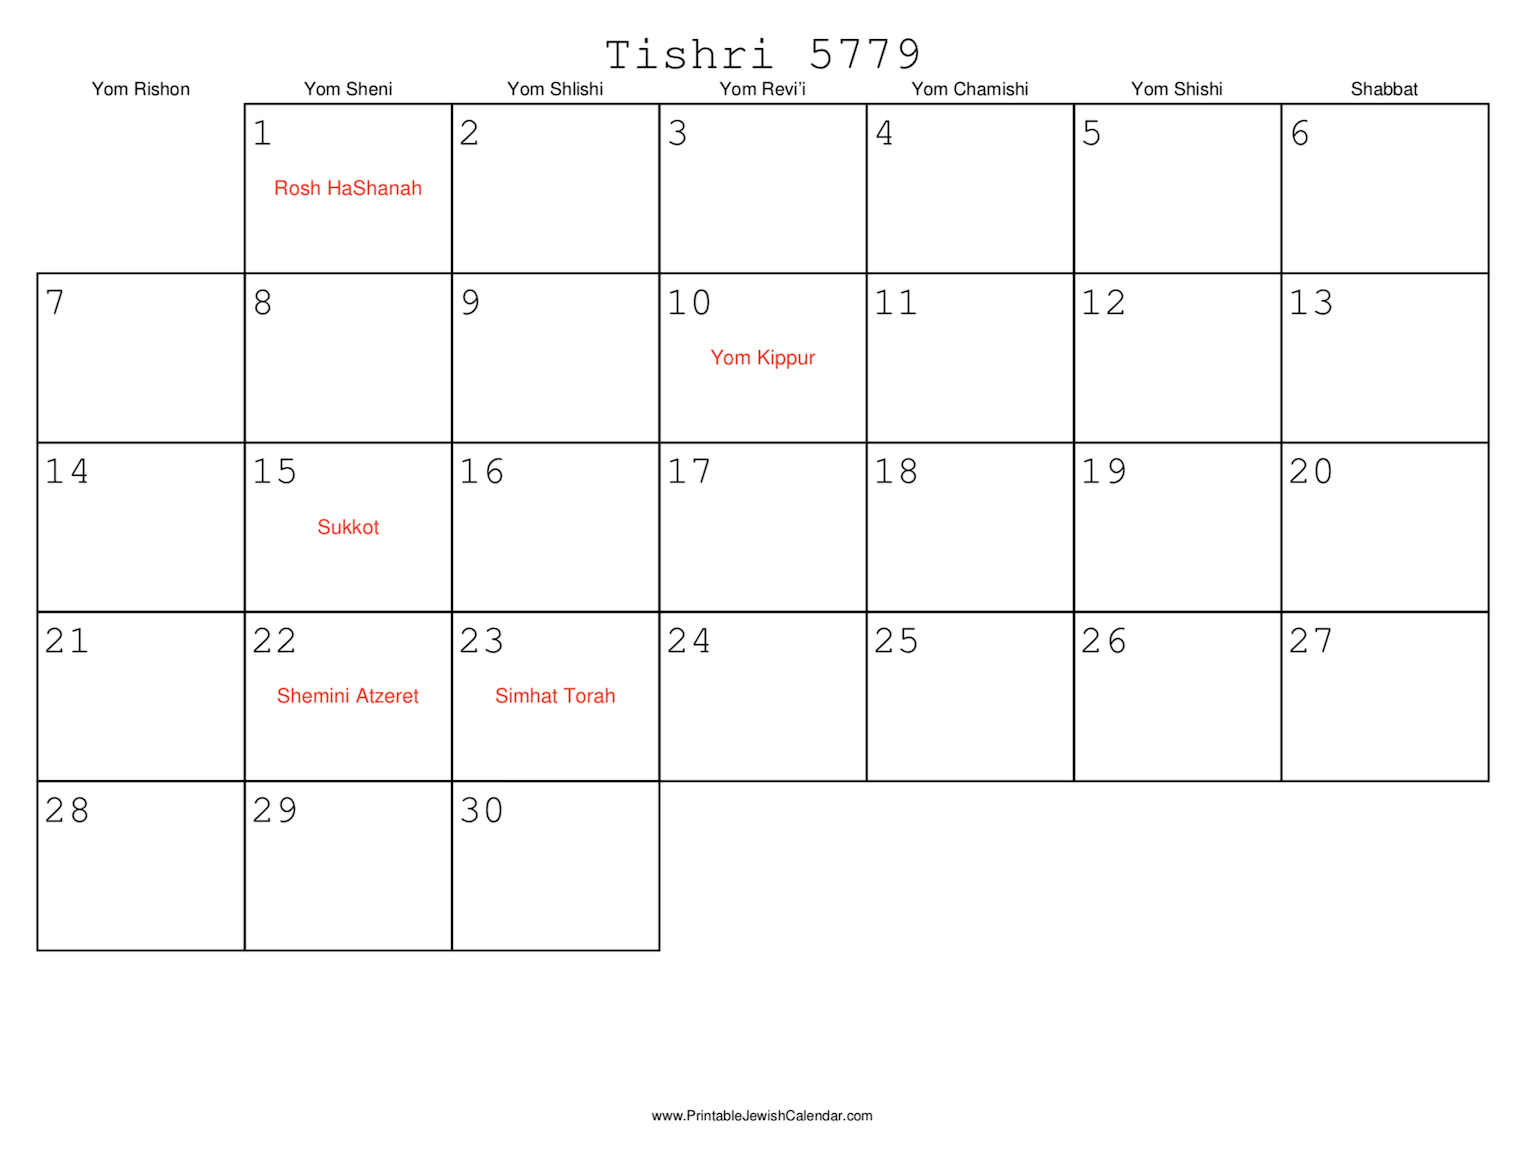 Print Calendars with Hebrew Dates and Jewish Holidays